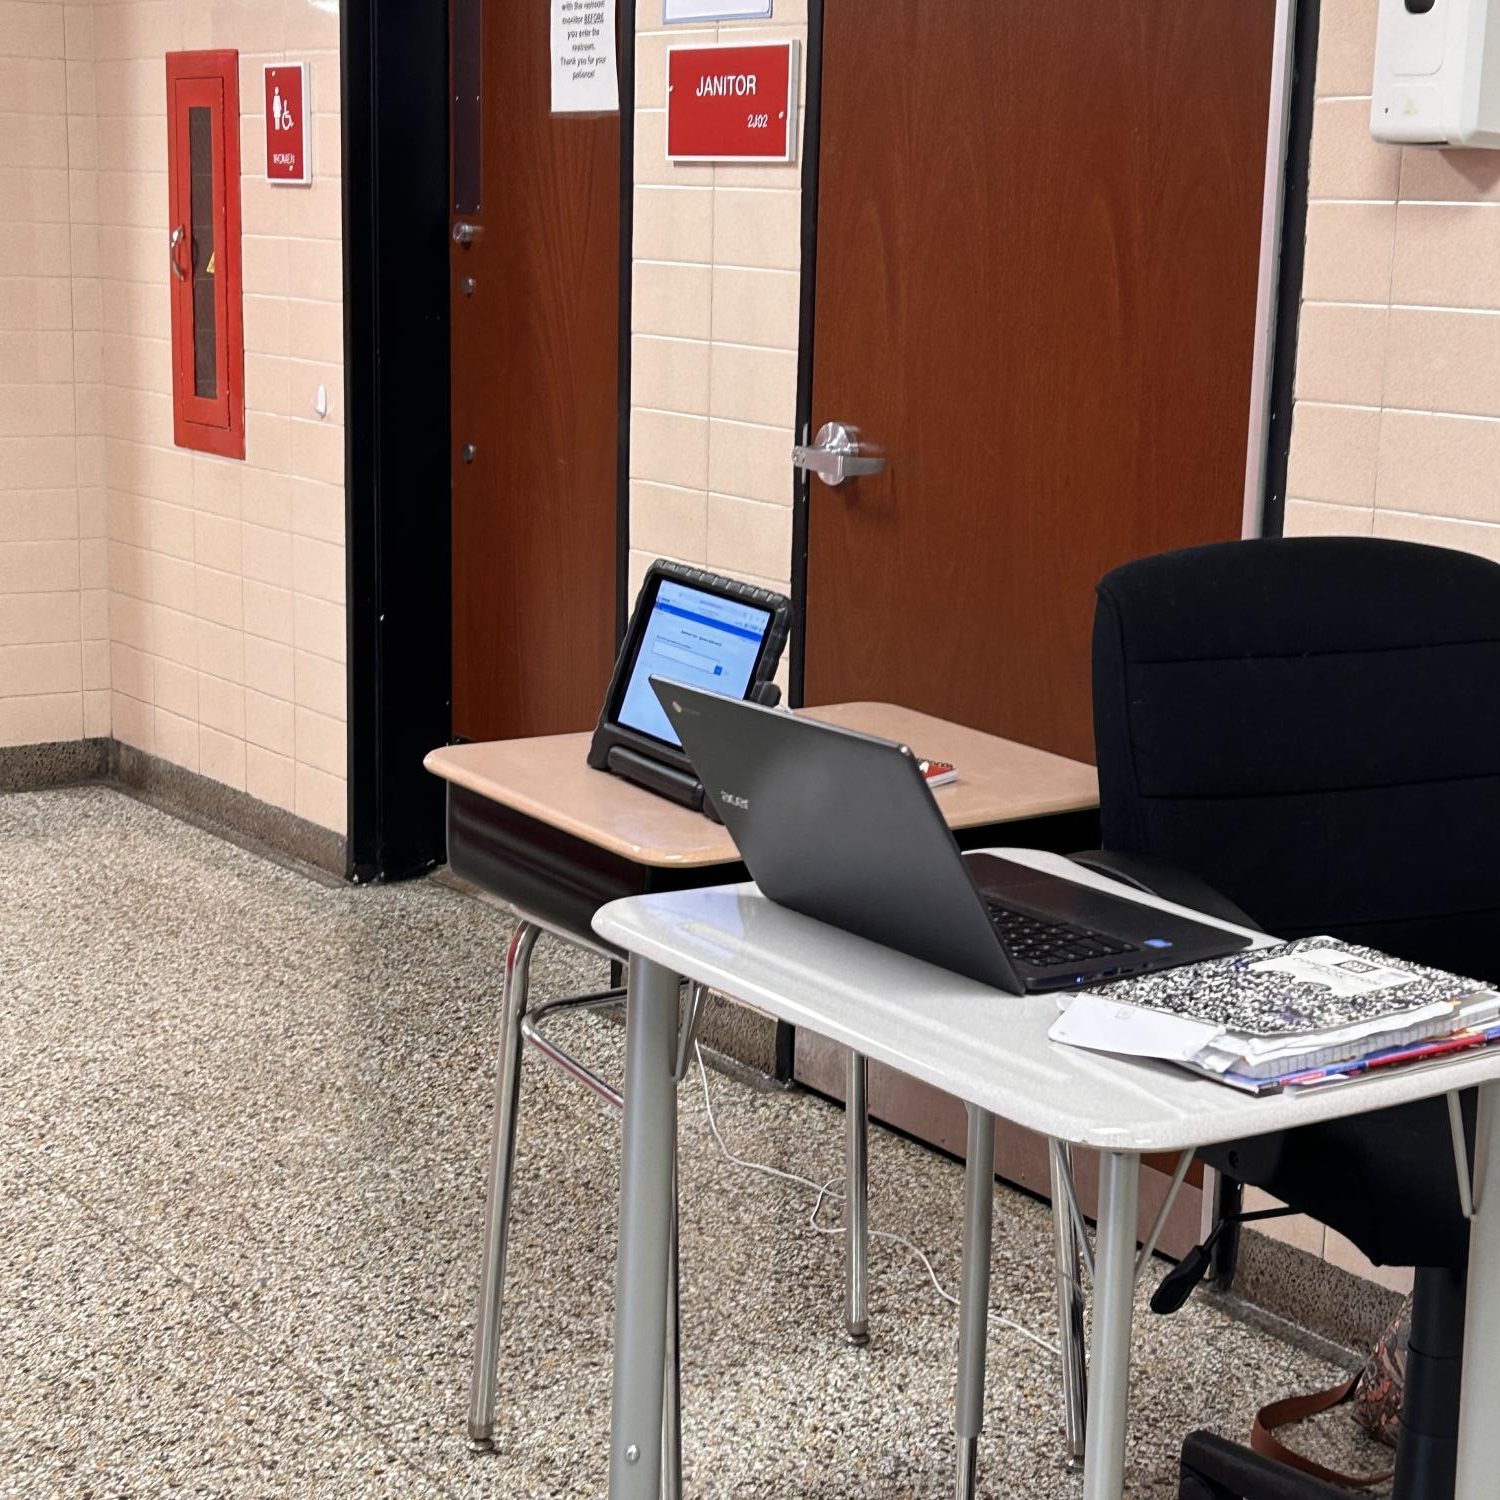 (Courtesy of Lauren Cammarota) The hall monitor station located in the B hall bathroom.